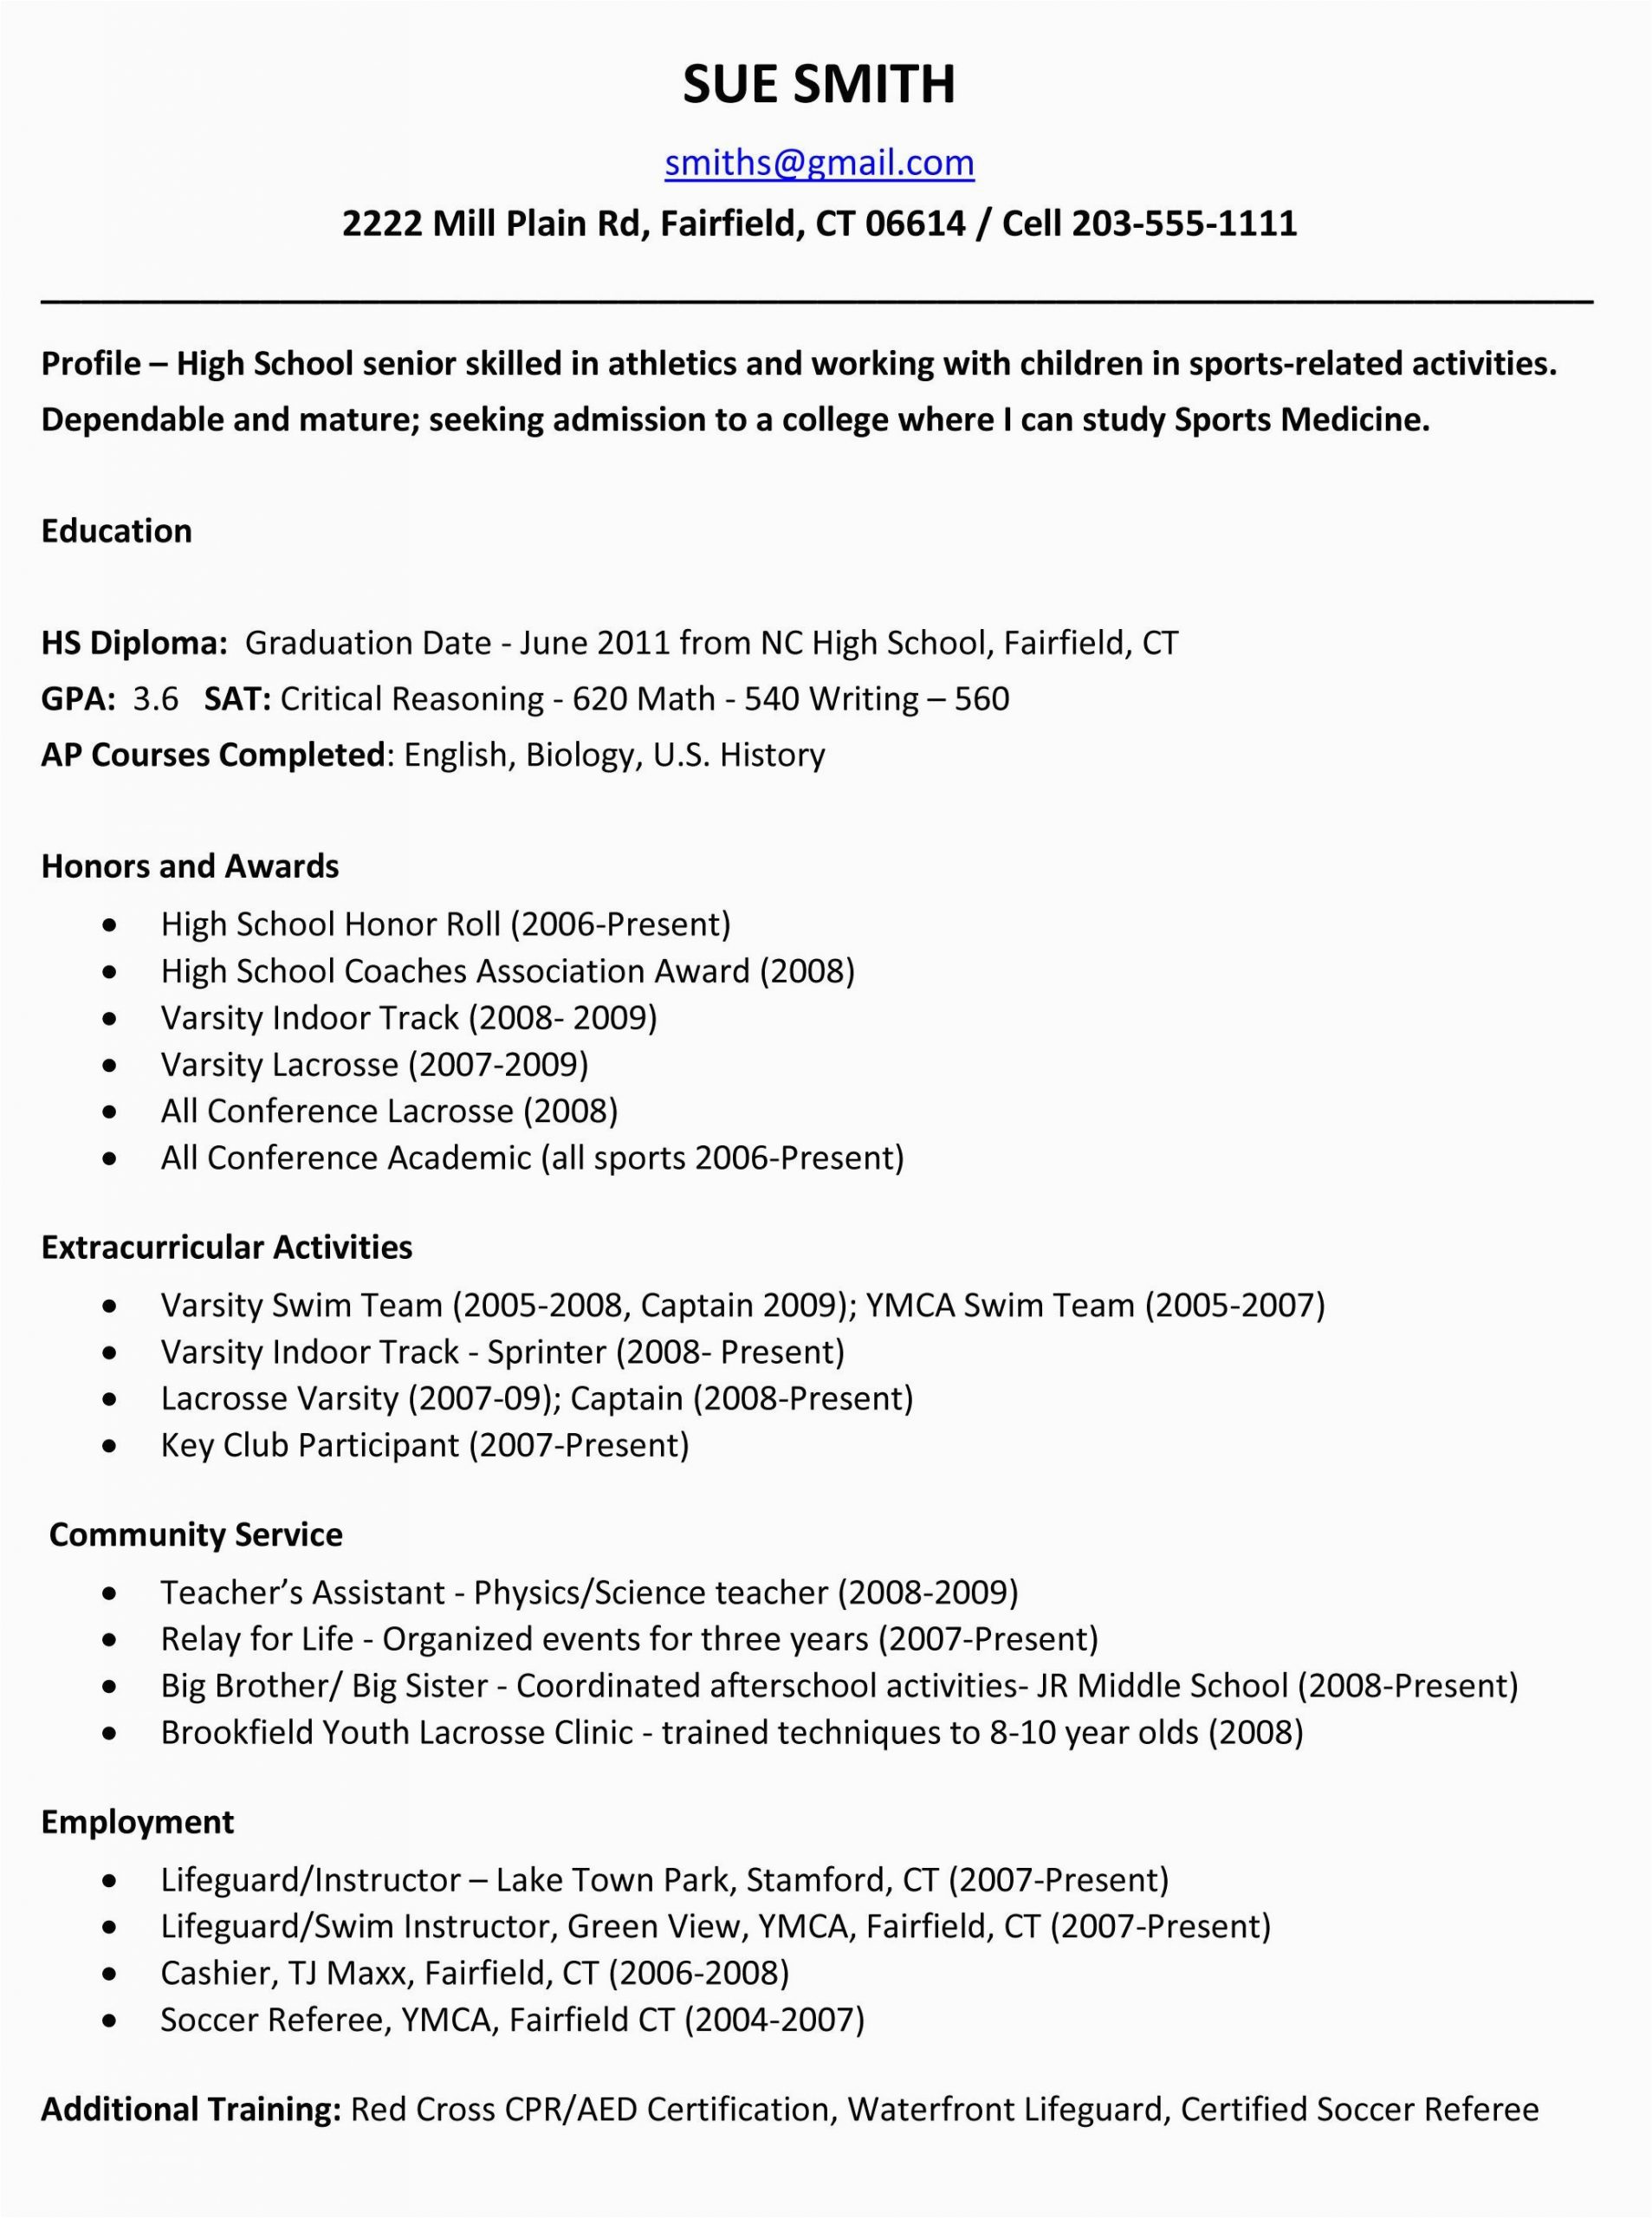 Sample Resume for High School Student Going to College Sample Resumes